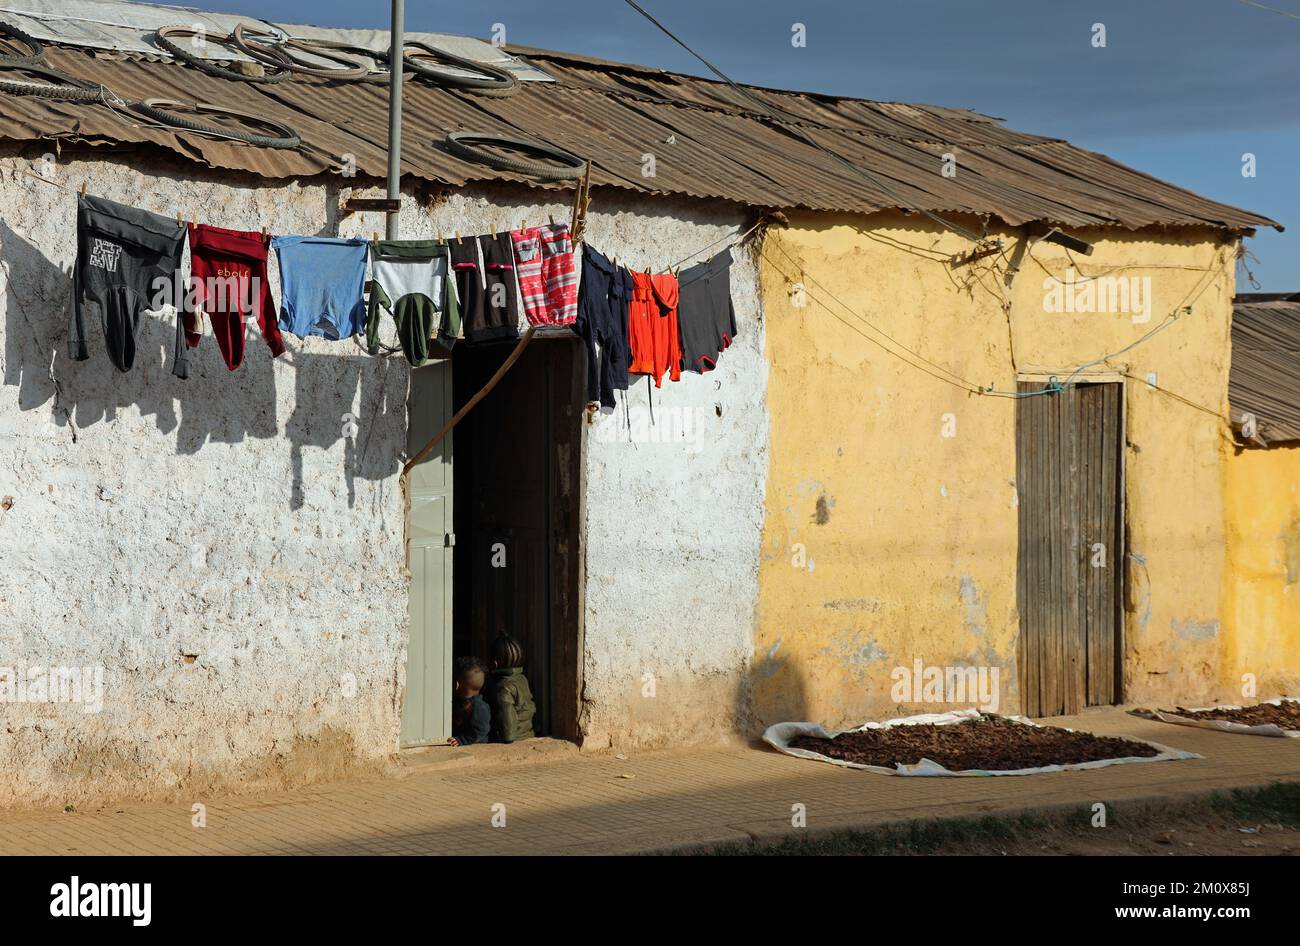 Traditional home on the outskirts of Asmara with children sitting in the doorway and washing hung out to dry Stock Photo